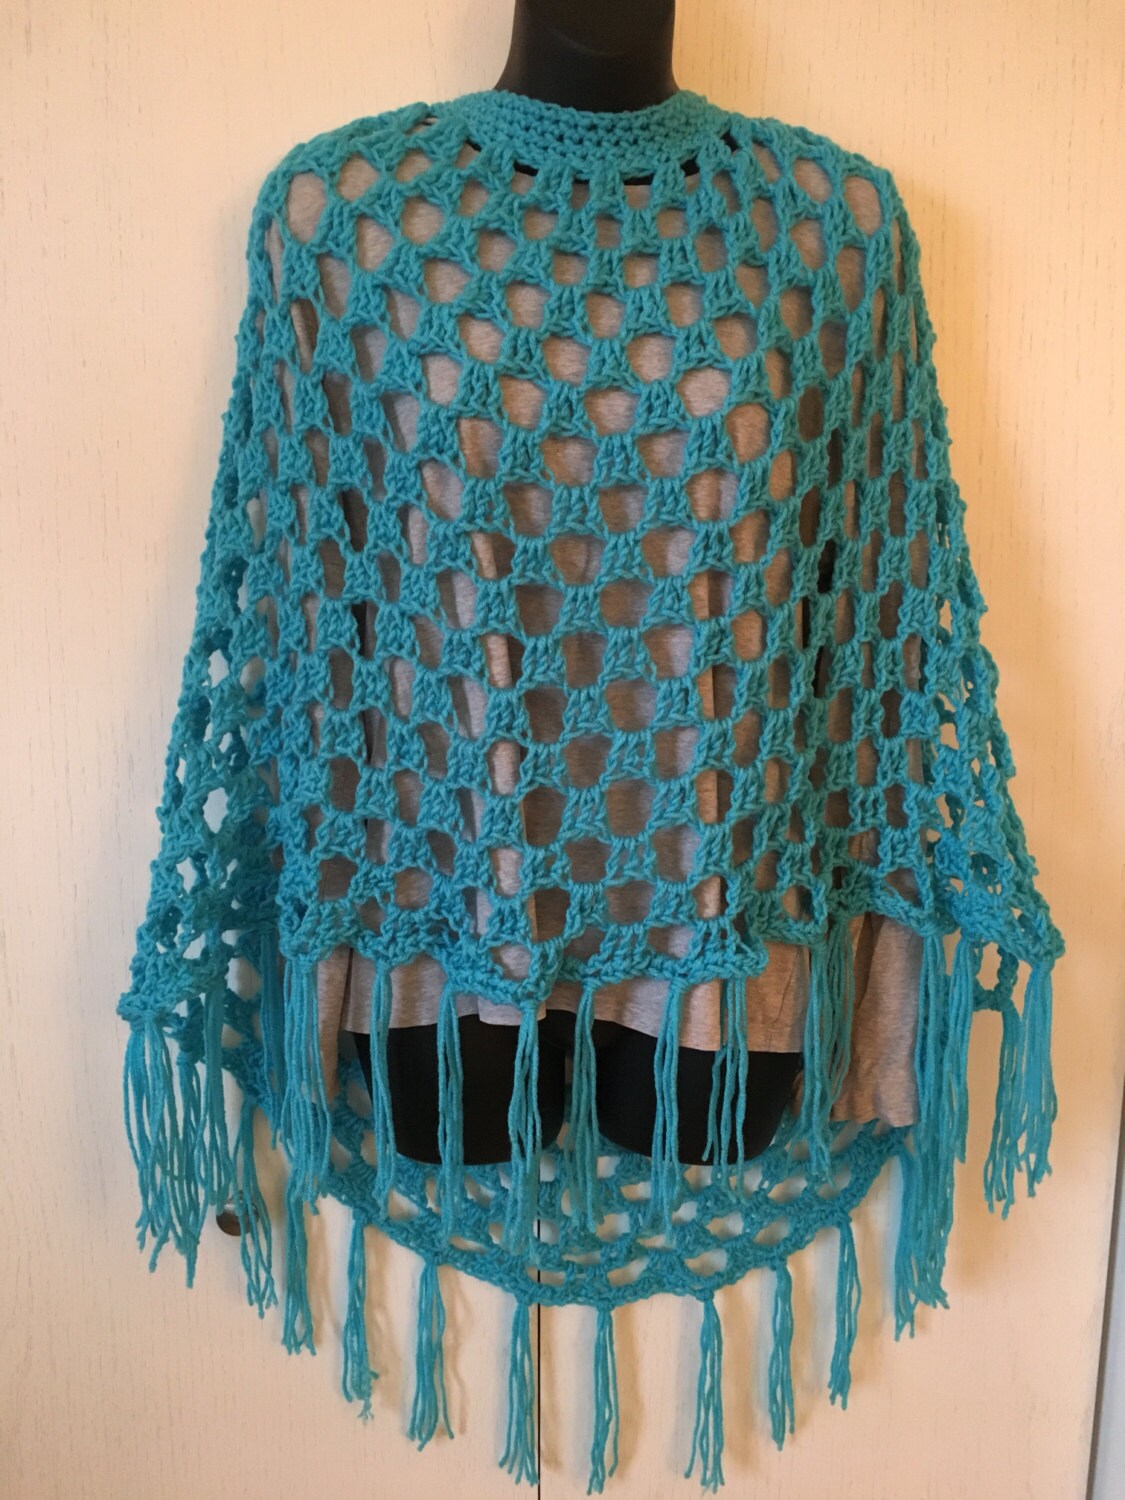 Crocheted Teal Shawl with Fringe